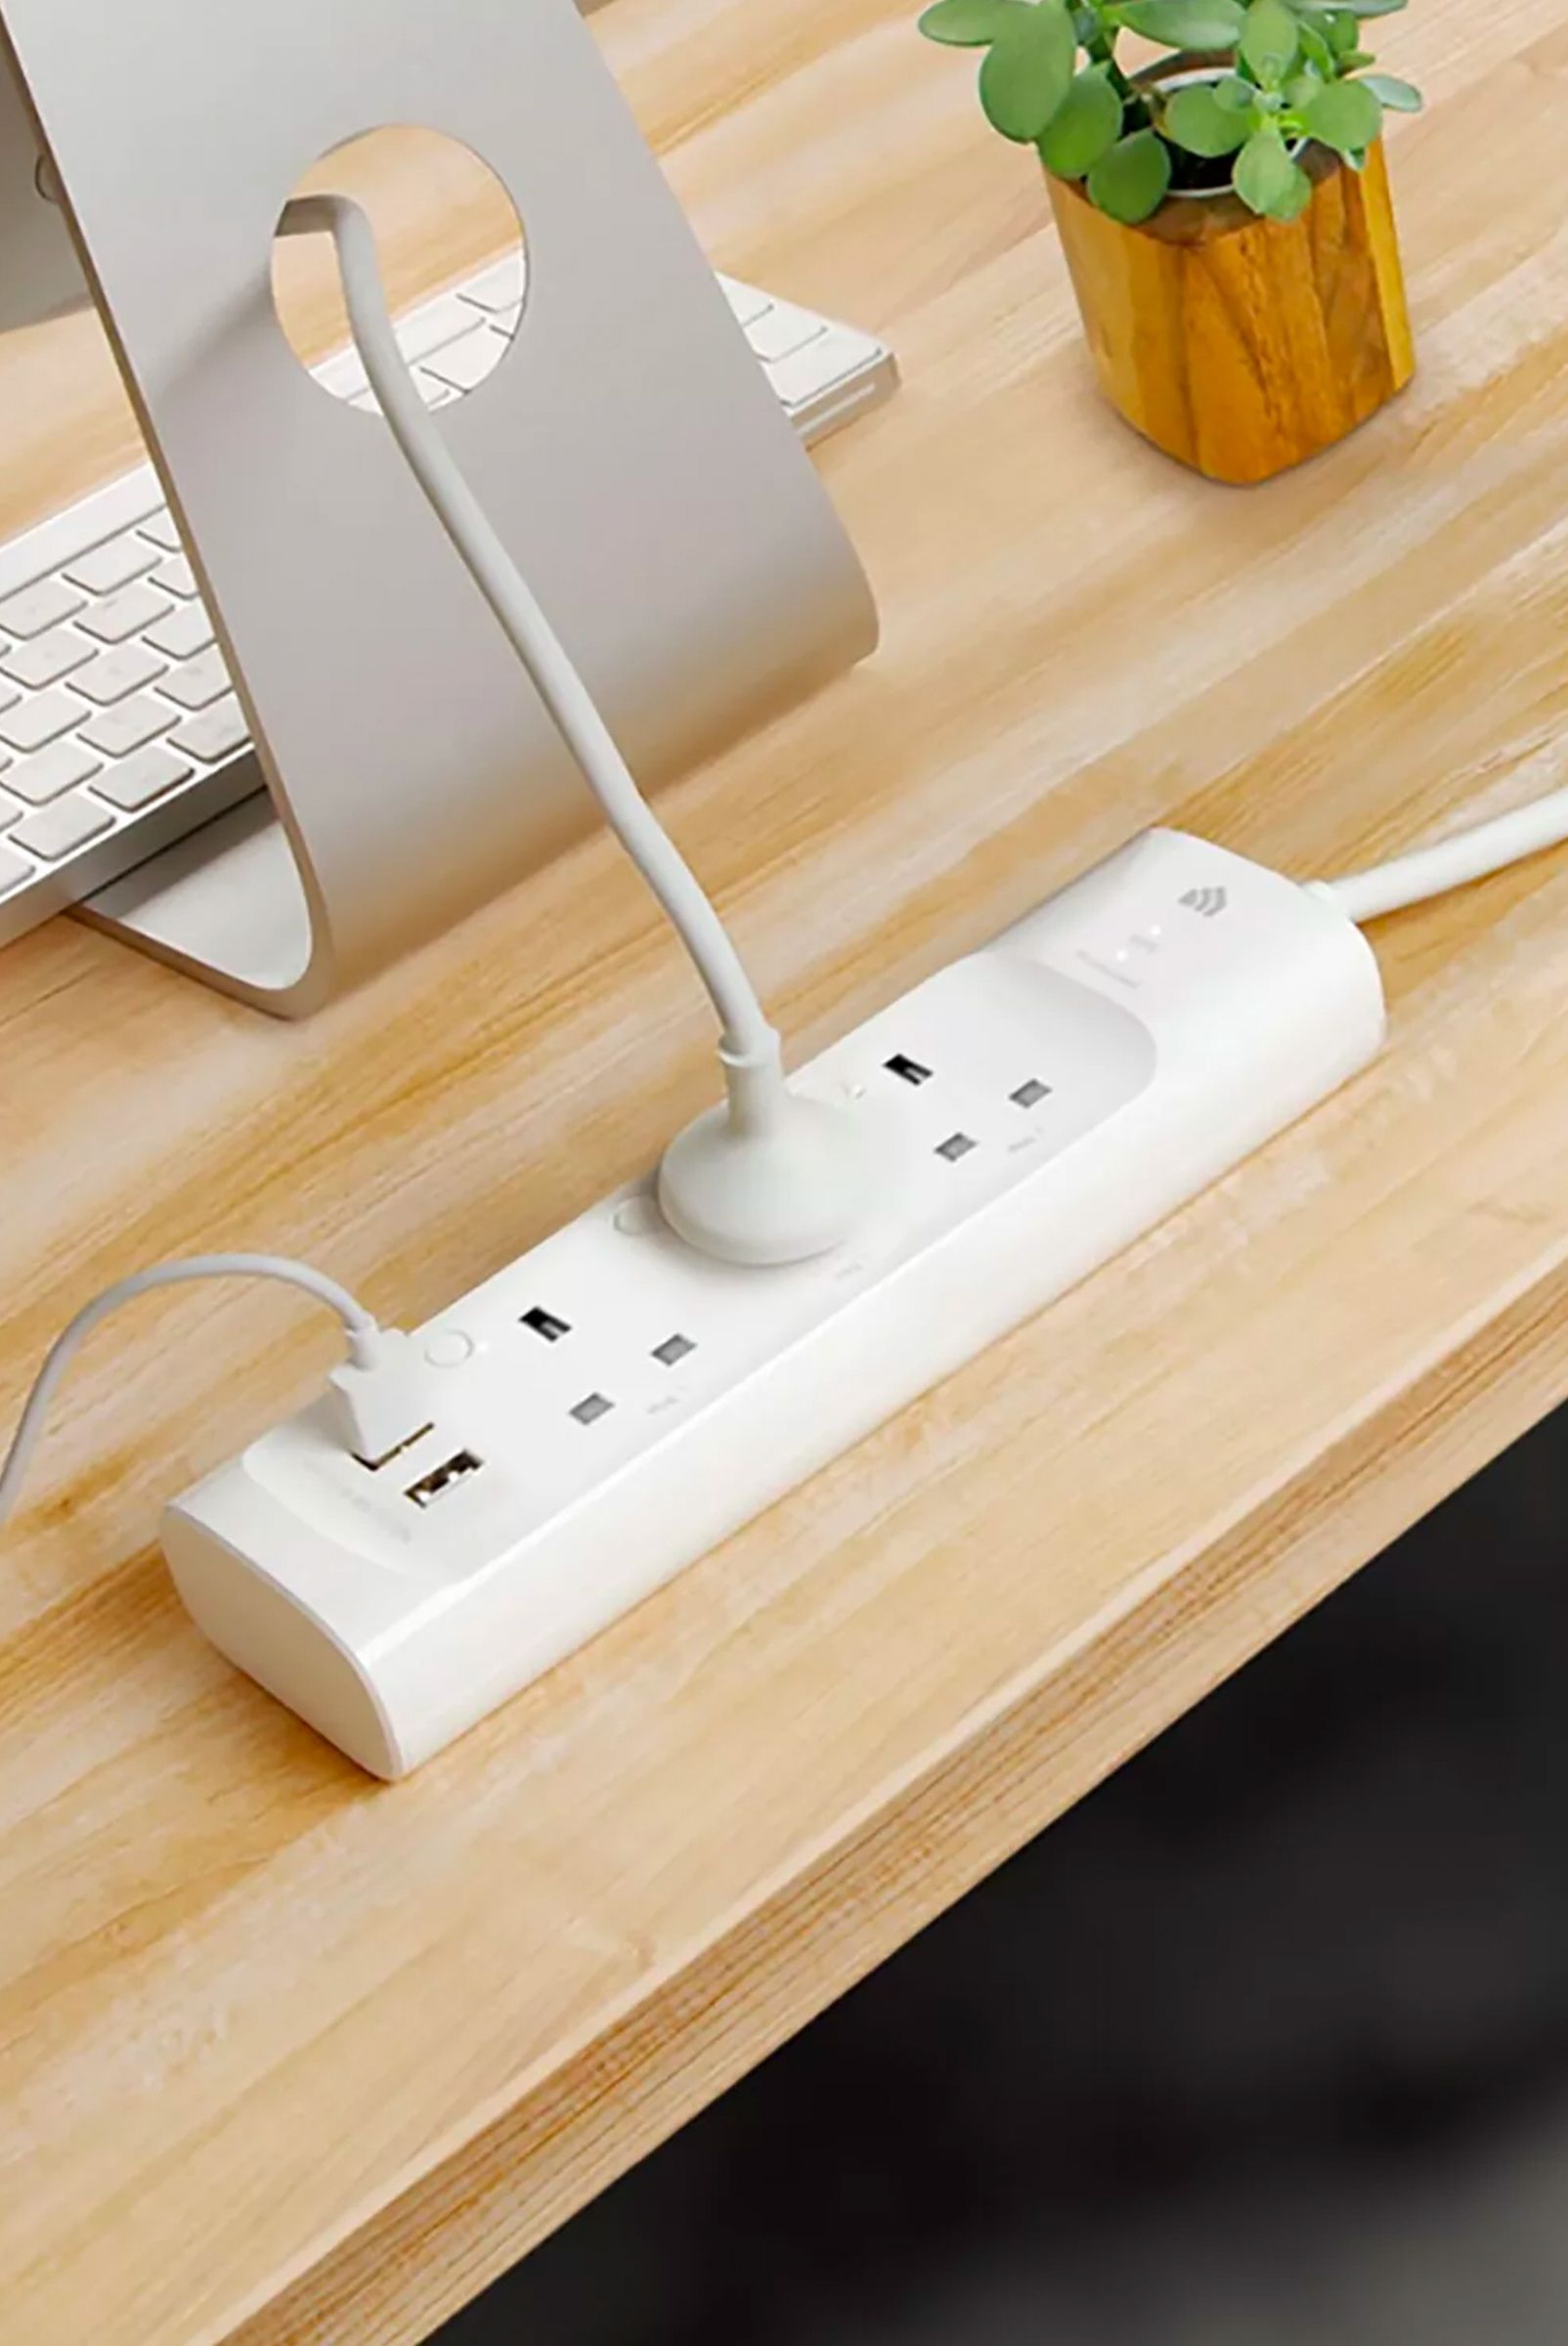 TP-Link KP303 Smart Wi-Fi Power Strip, 3 Gang with 2 USB & Surge Protection, £22.00